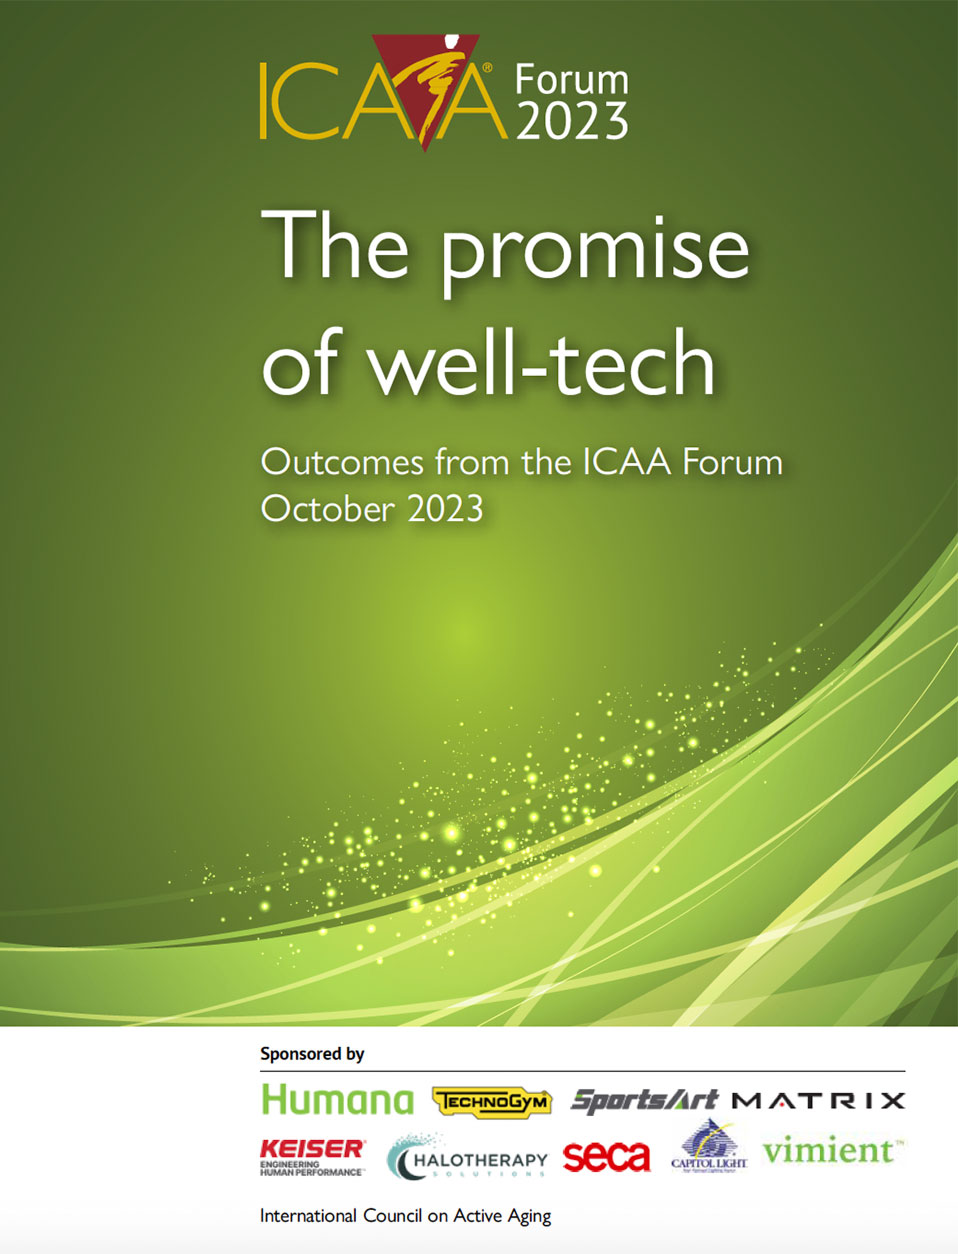 The promise of well-tech